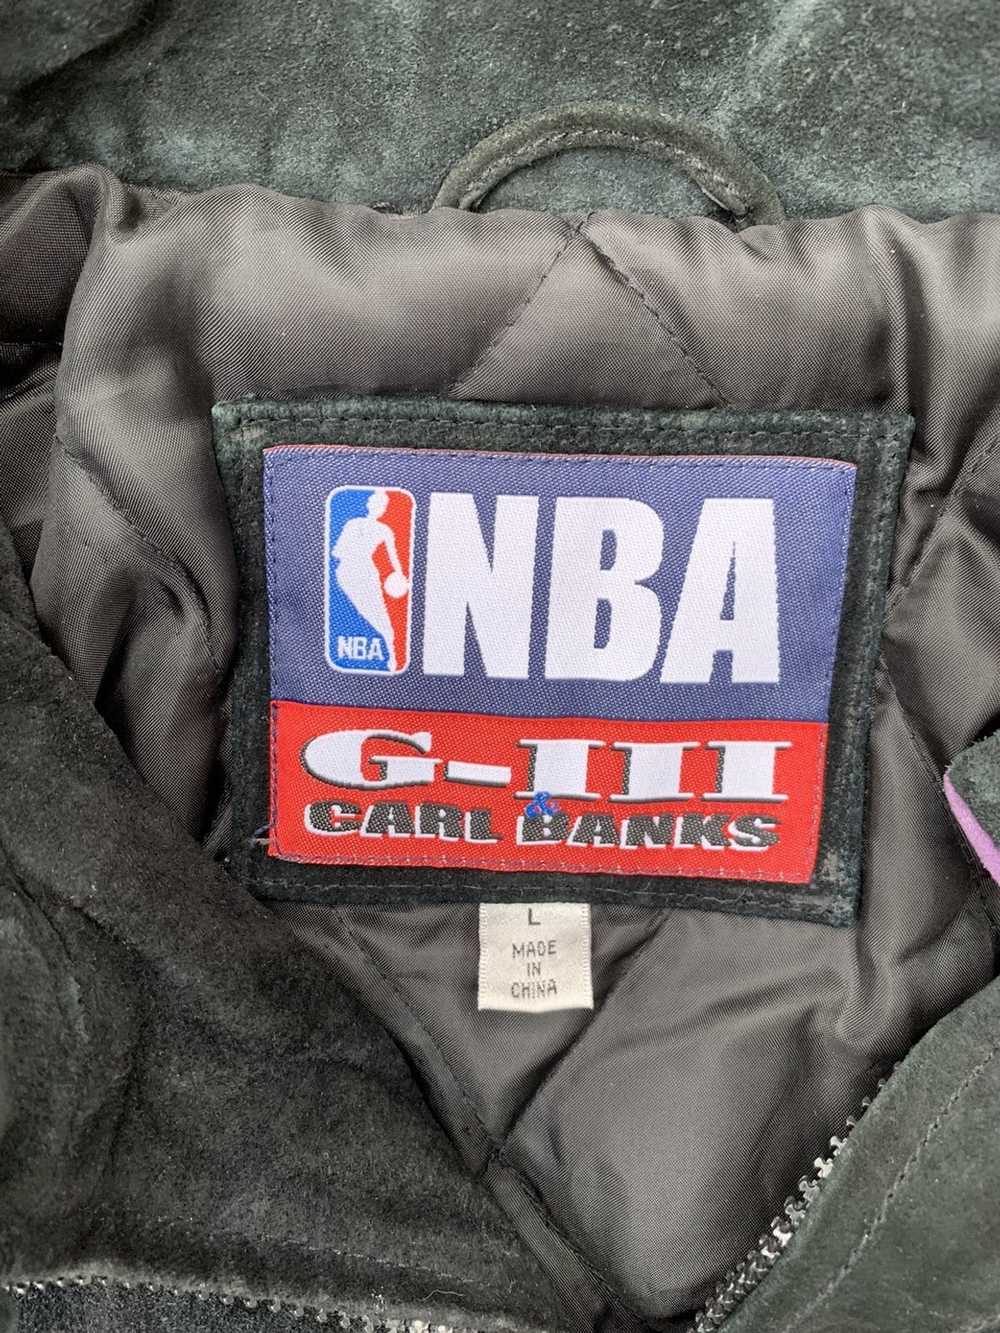 Lakers × NBA × Vintage Lakers Leather Coat - image 3